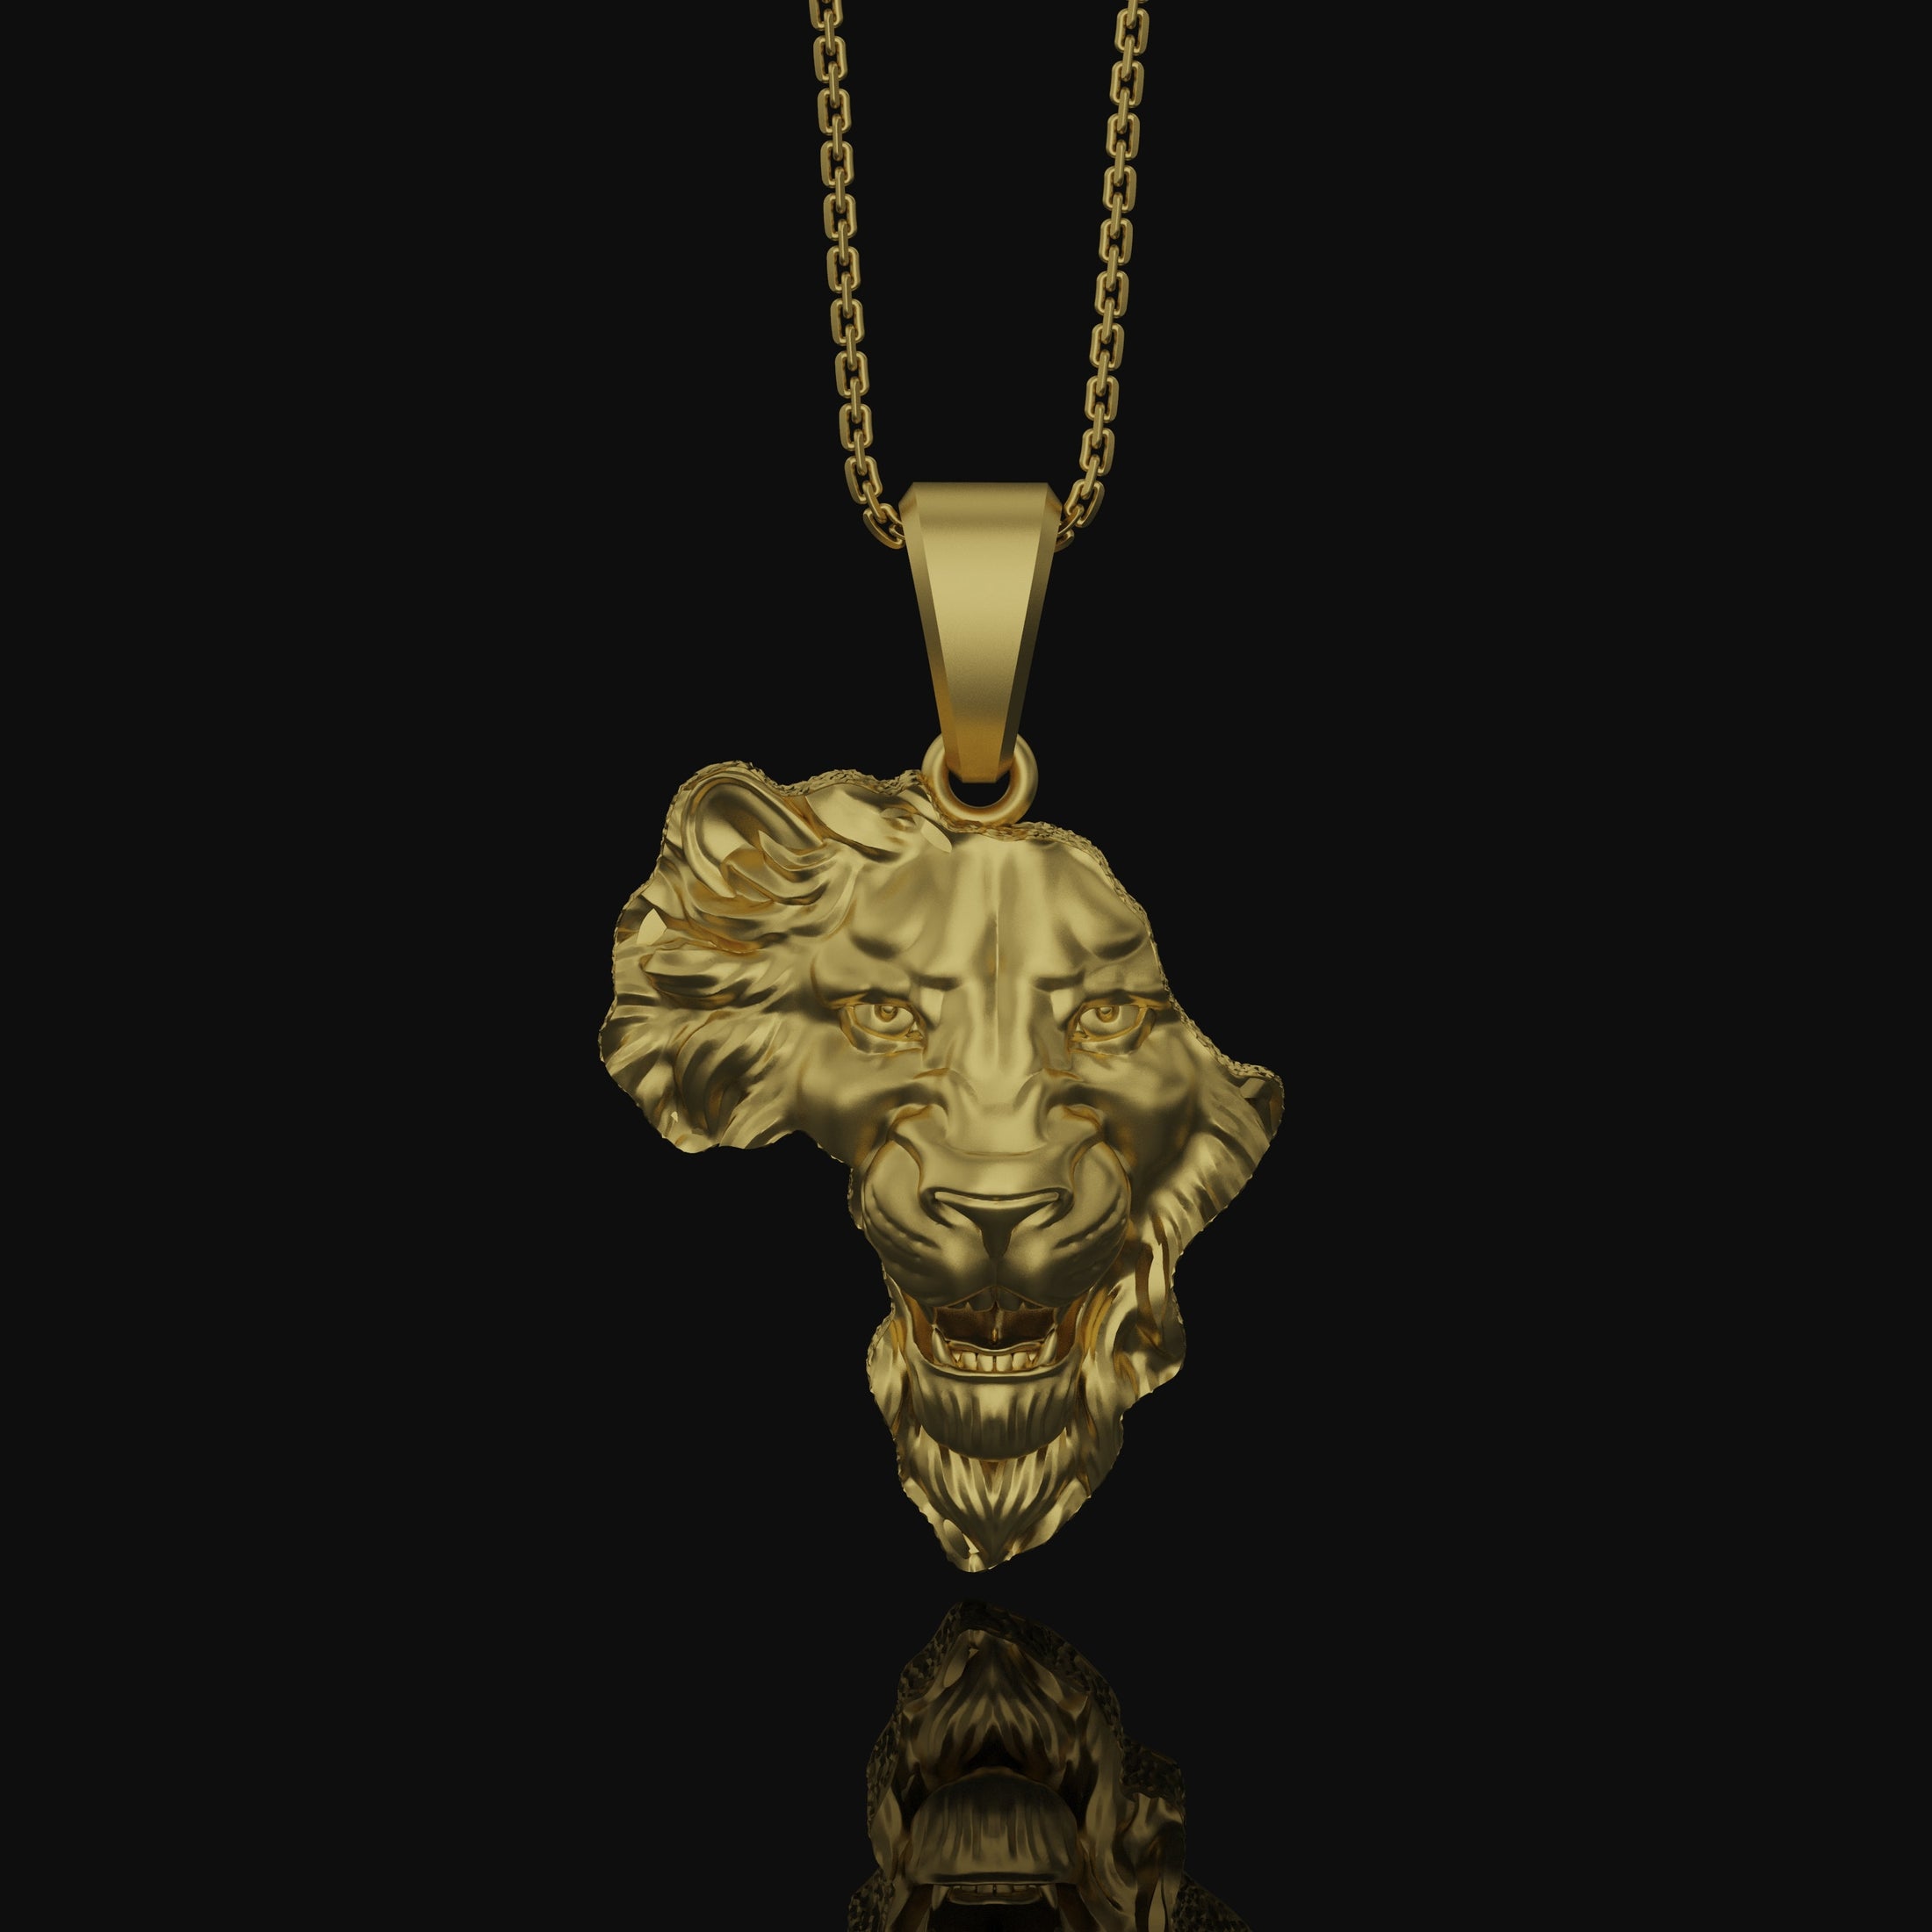 Silver Africa Continent Shaped Lion Head Necklace - Majestic Safari Style Pendant, Elegant Wildlife African Pride Jewelry Gold Finish